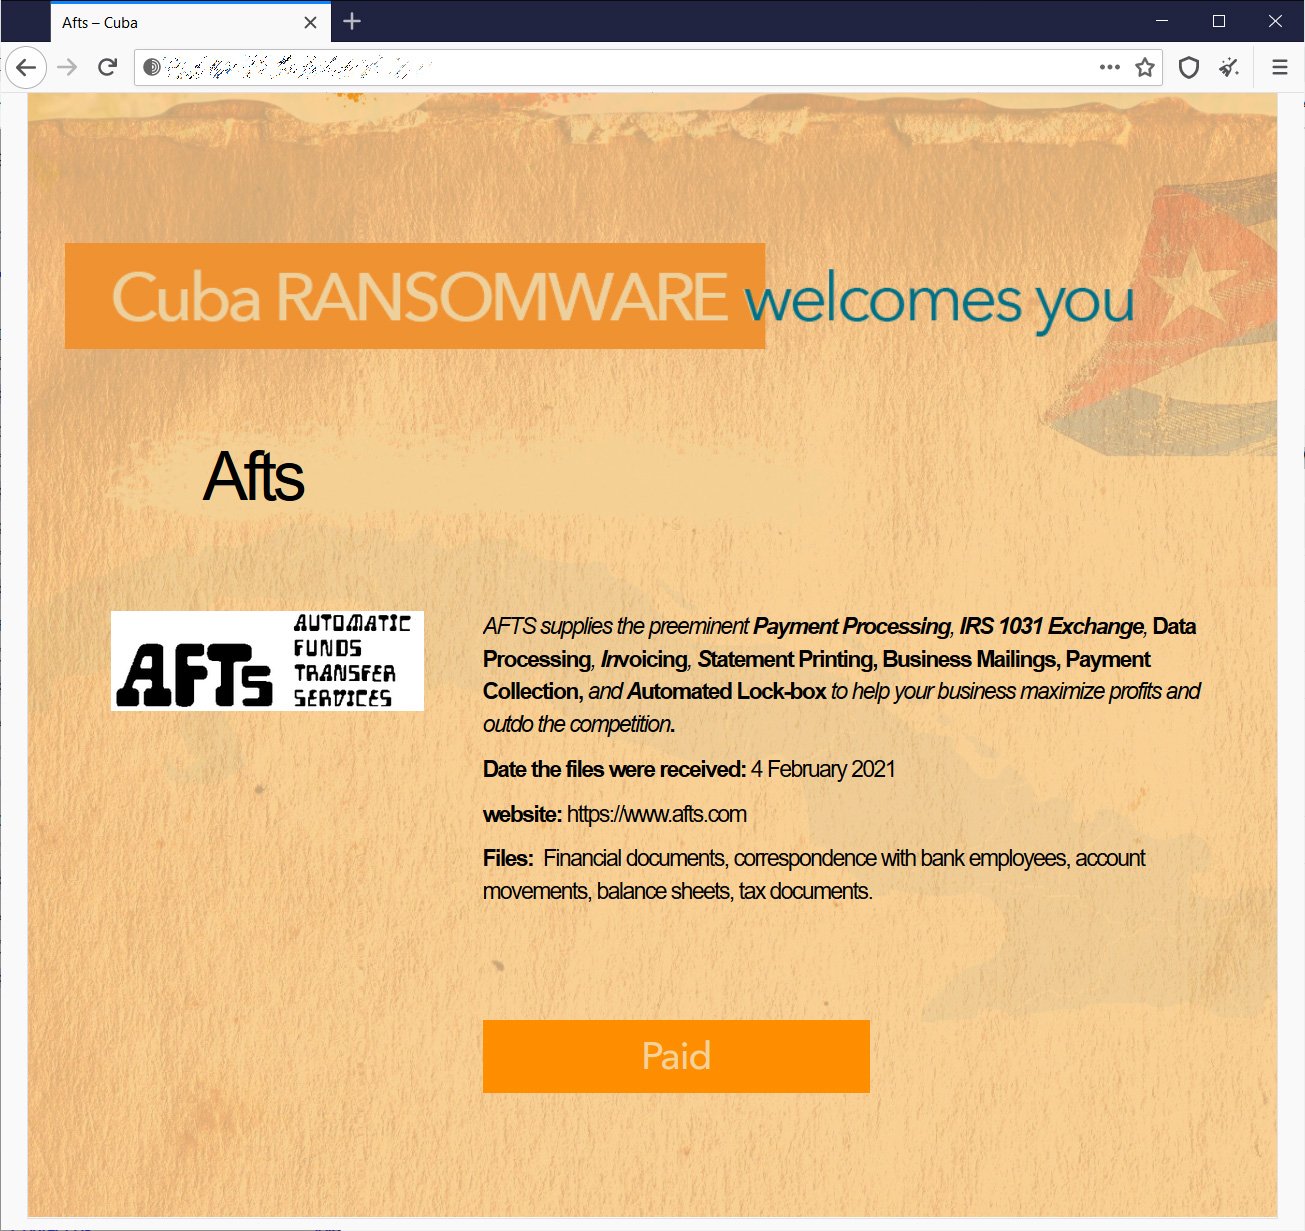 Cuba ransomware data leak page for AFTS